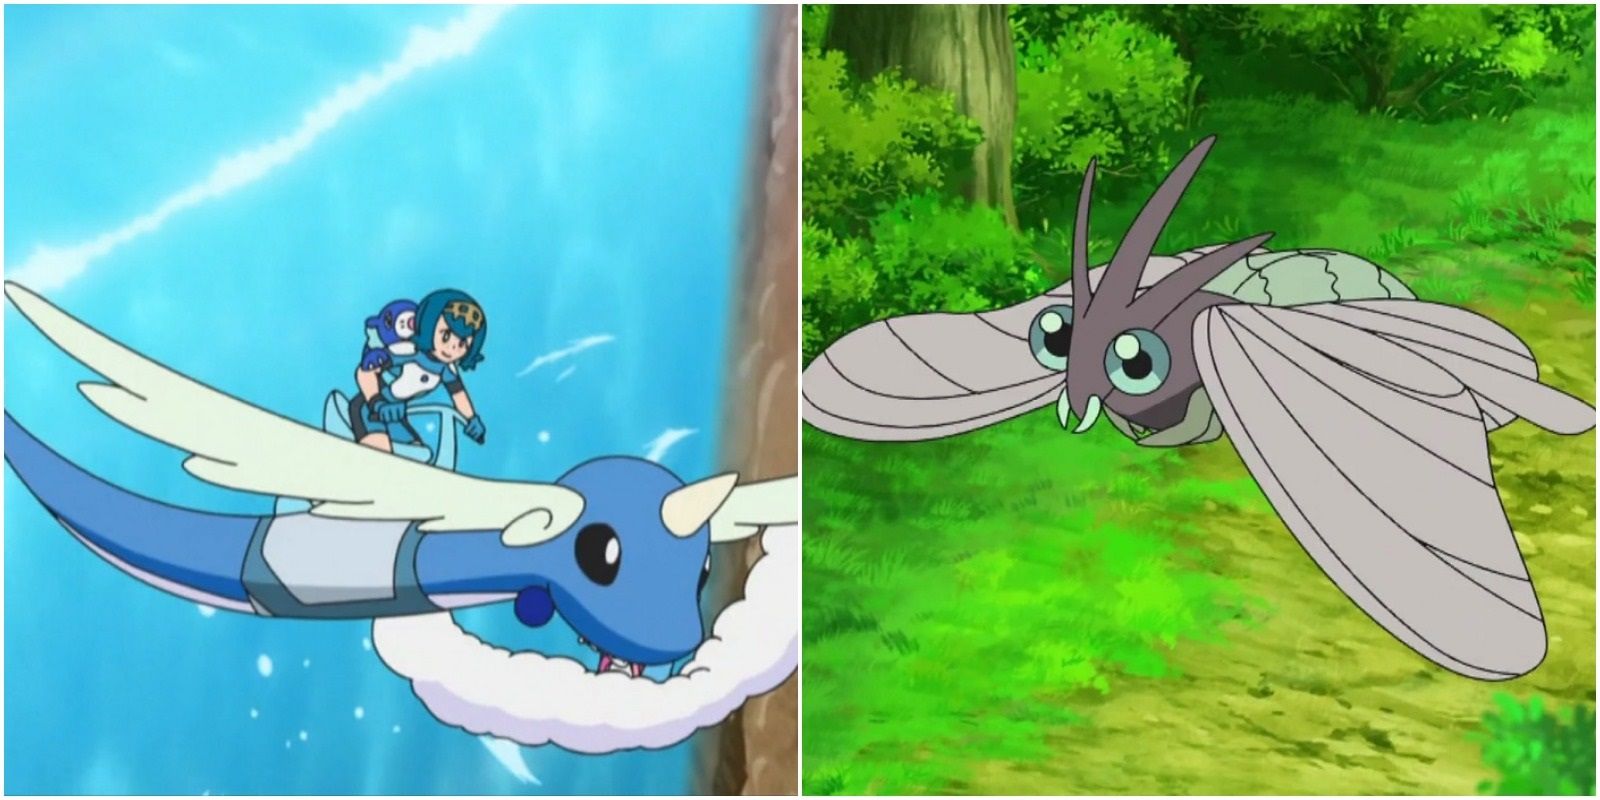 Flying-type featured